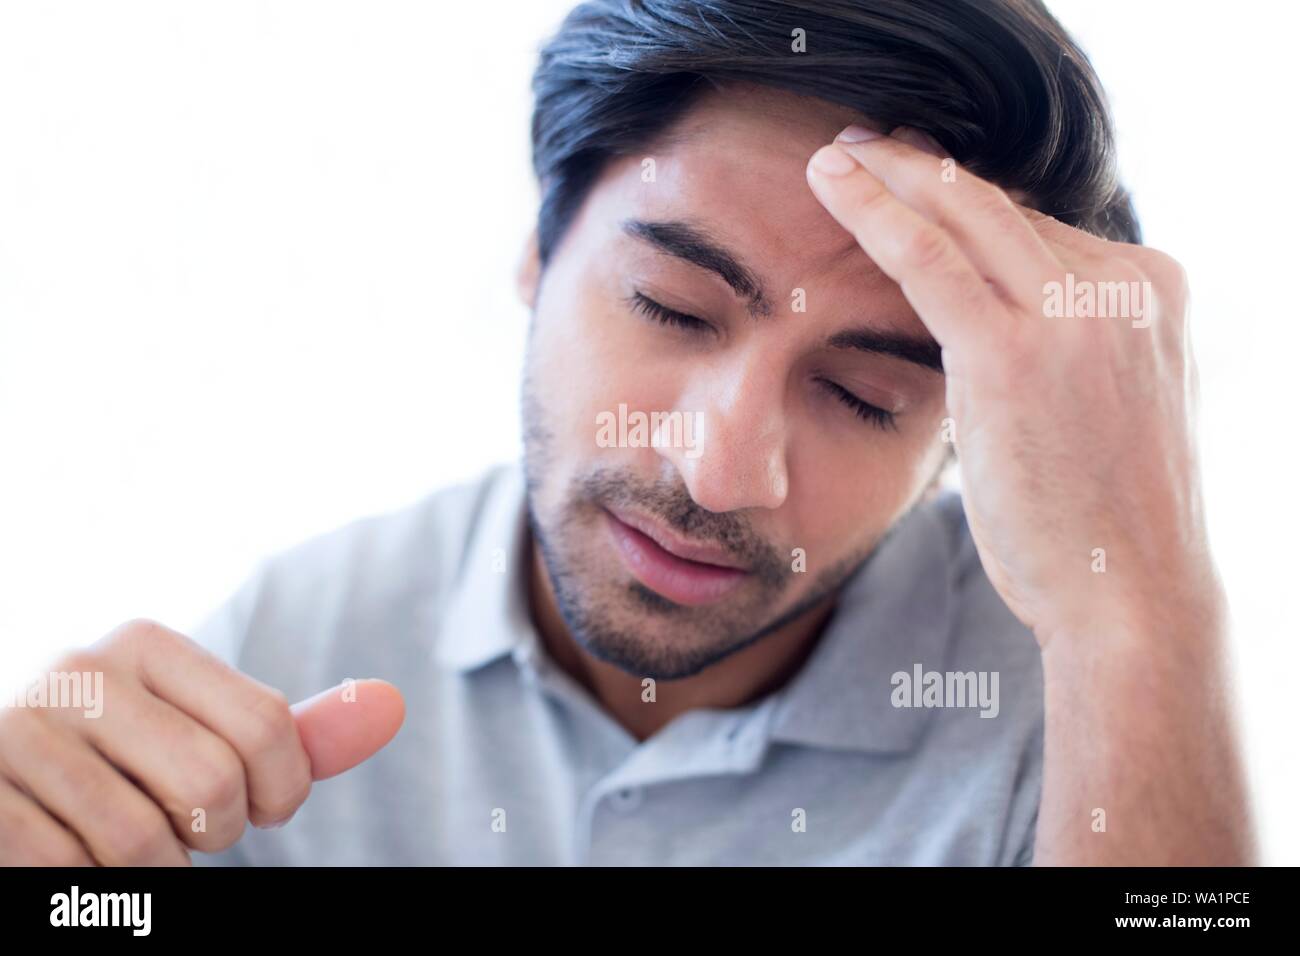 Man touching his forehead in pain. Stock Photo